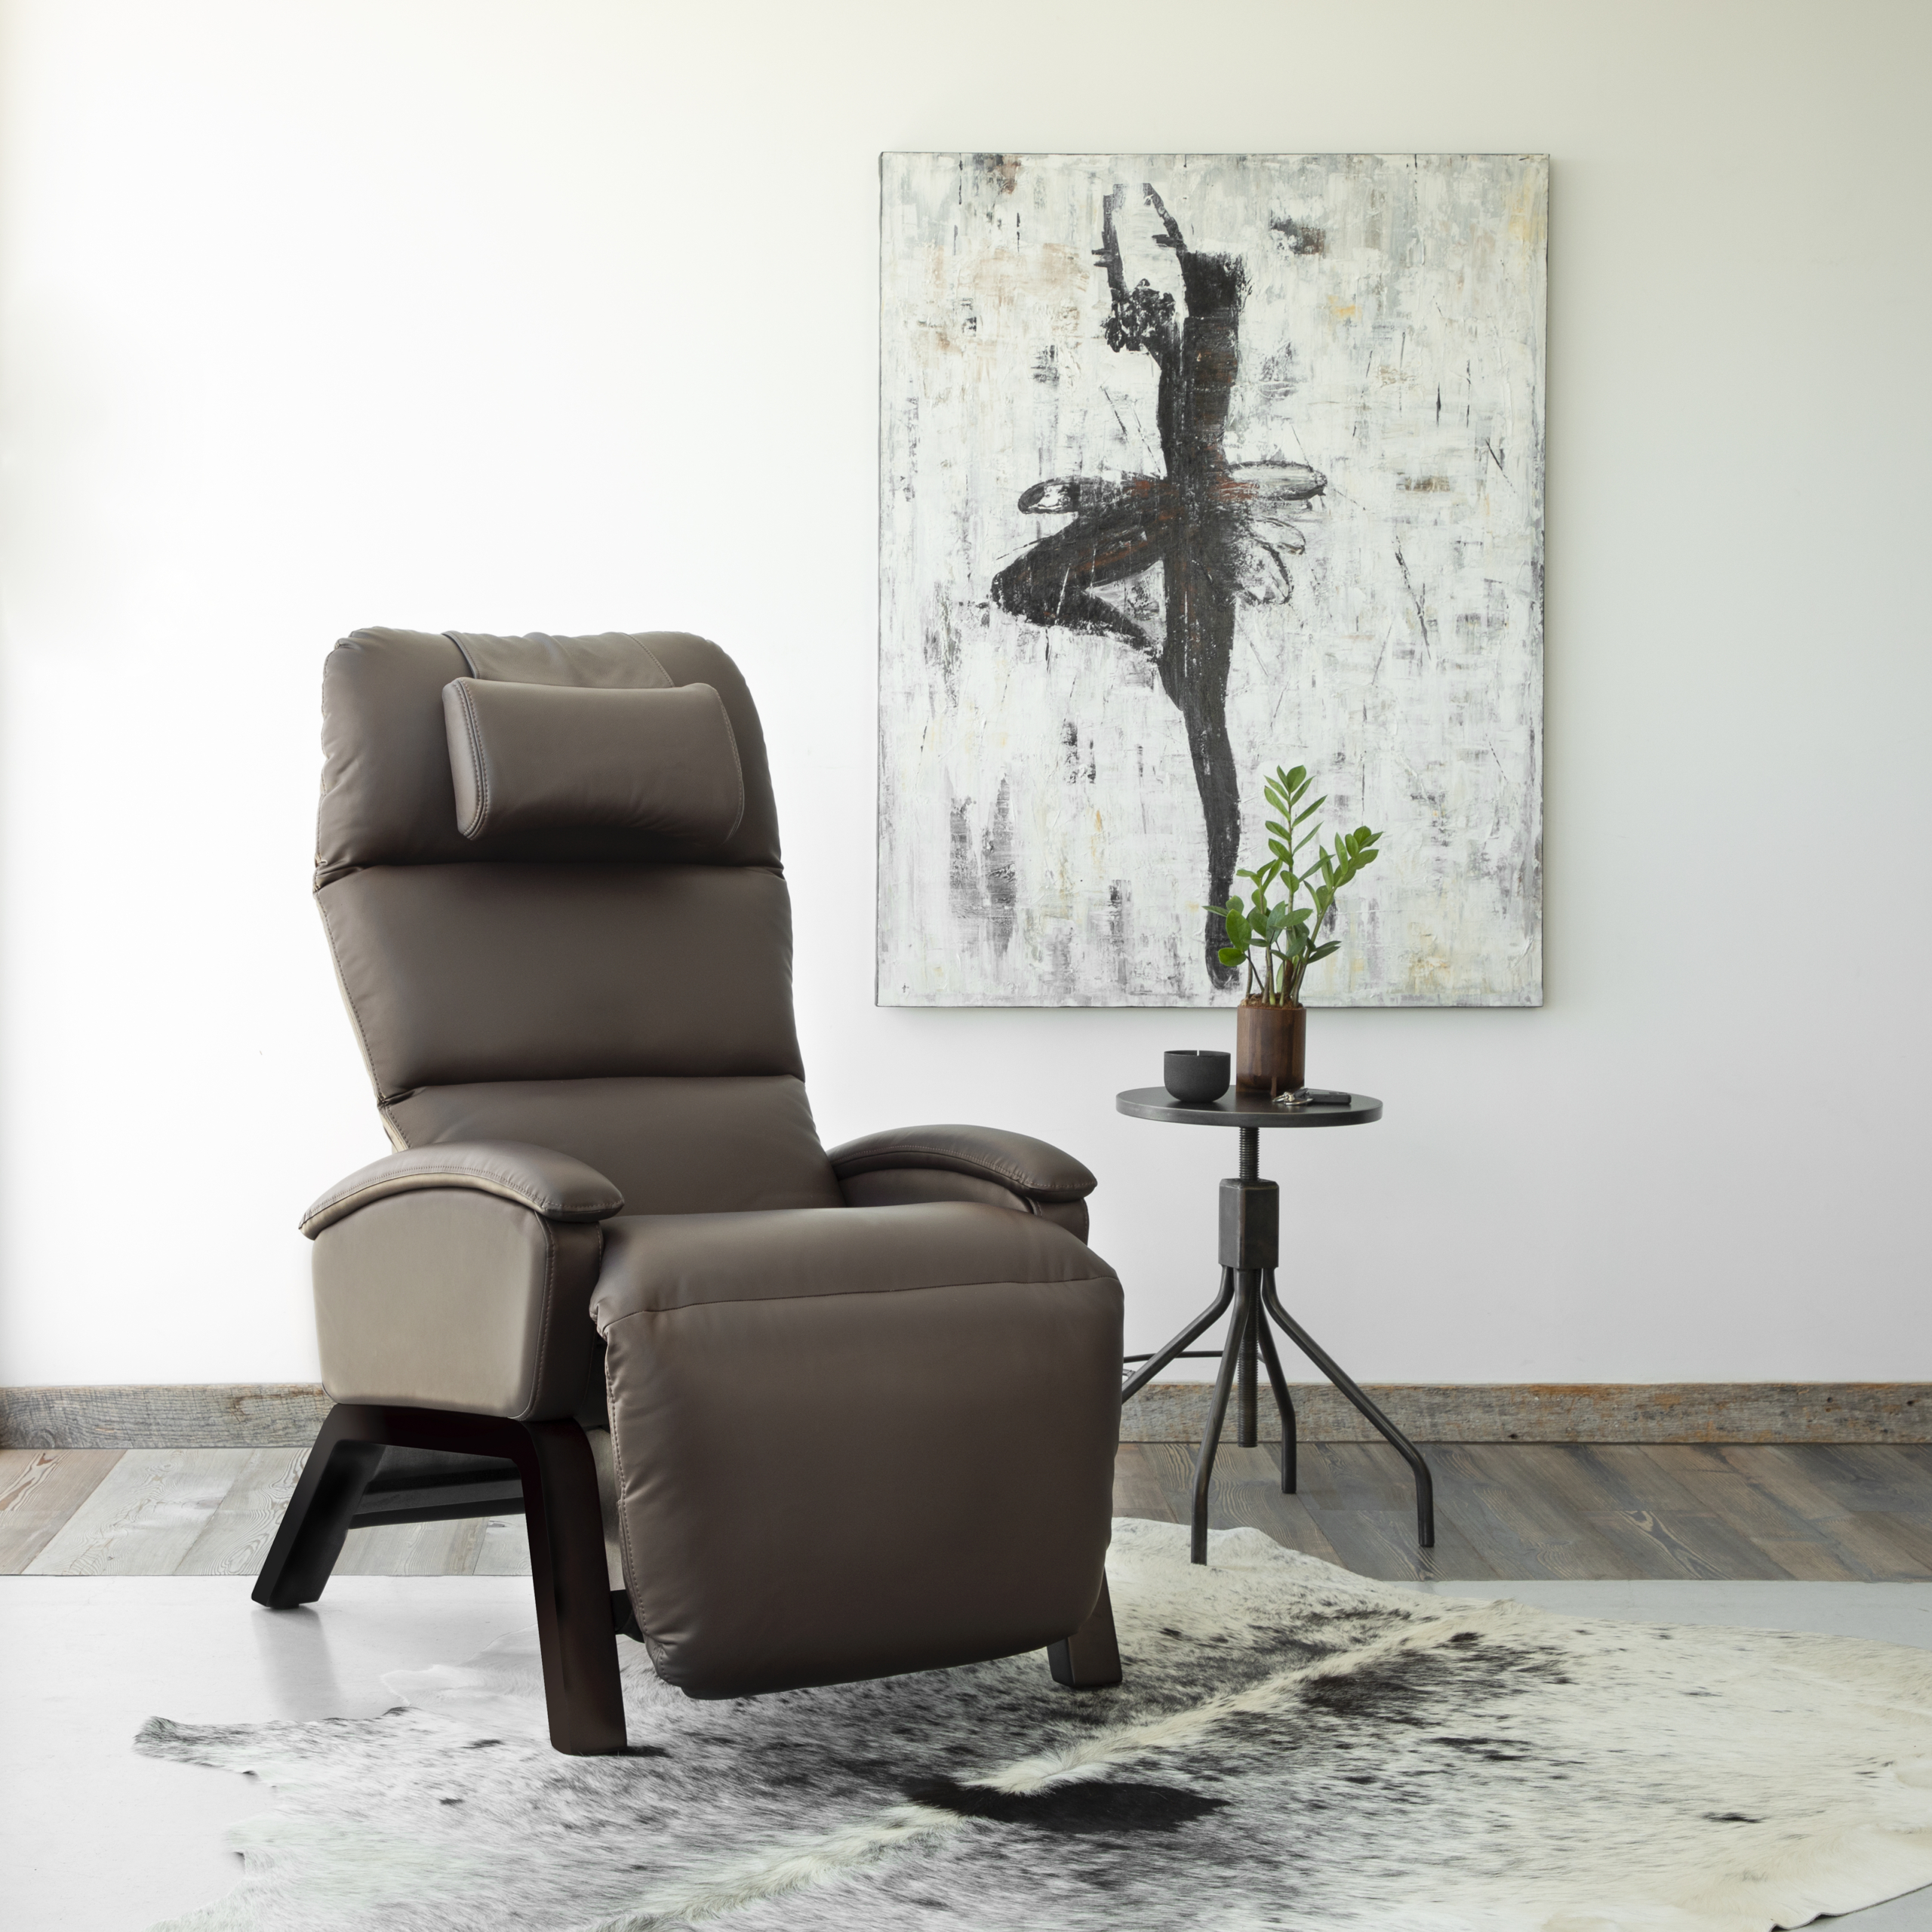 Photo of the Cozzia Svago SV200 chair.